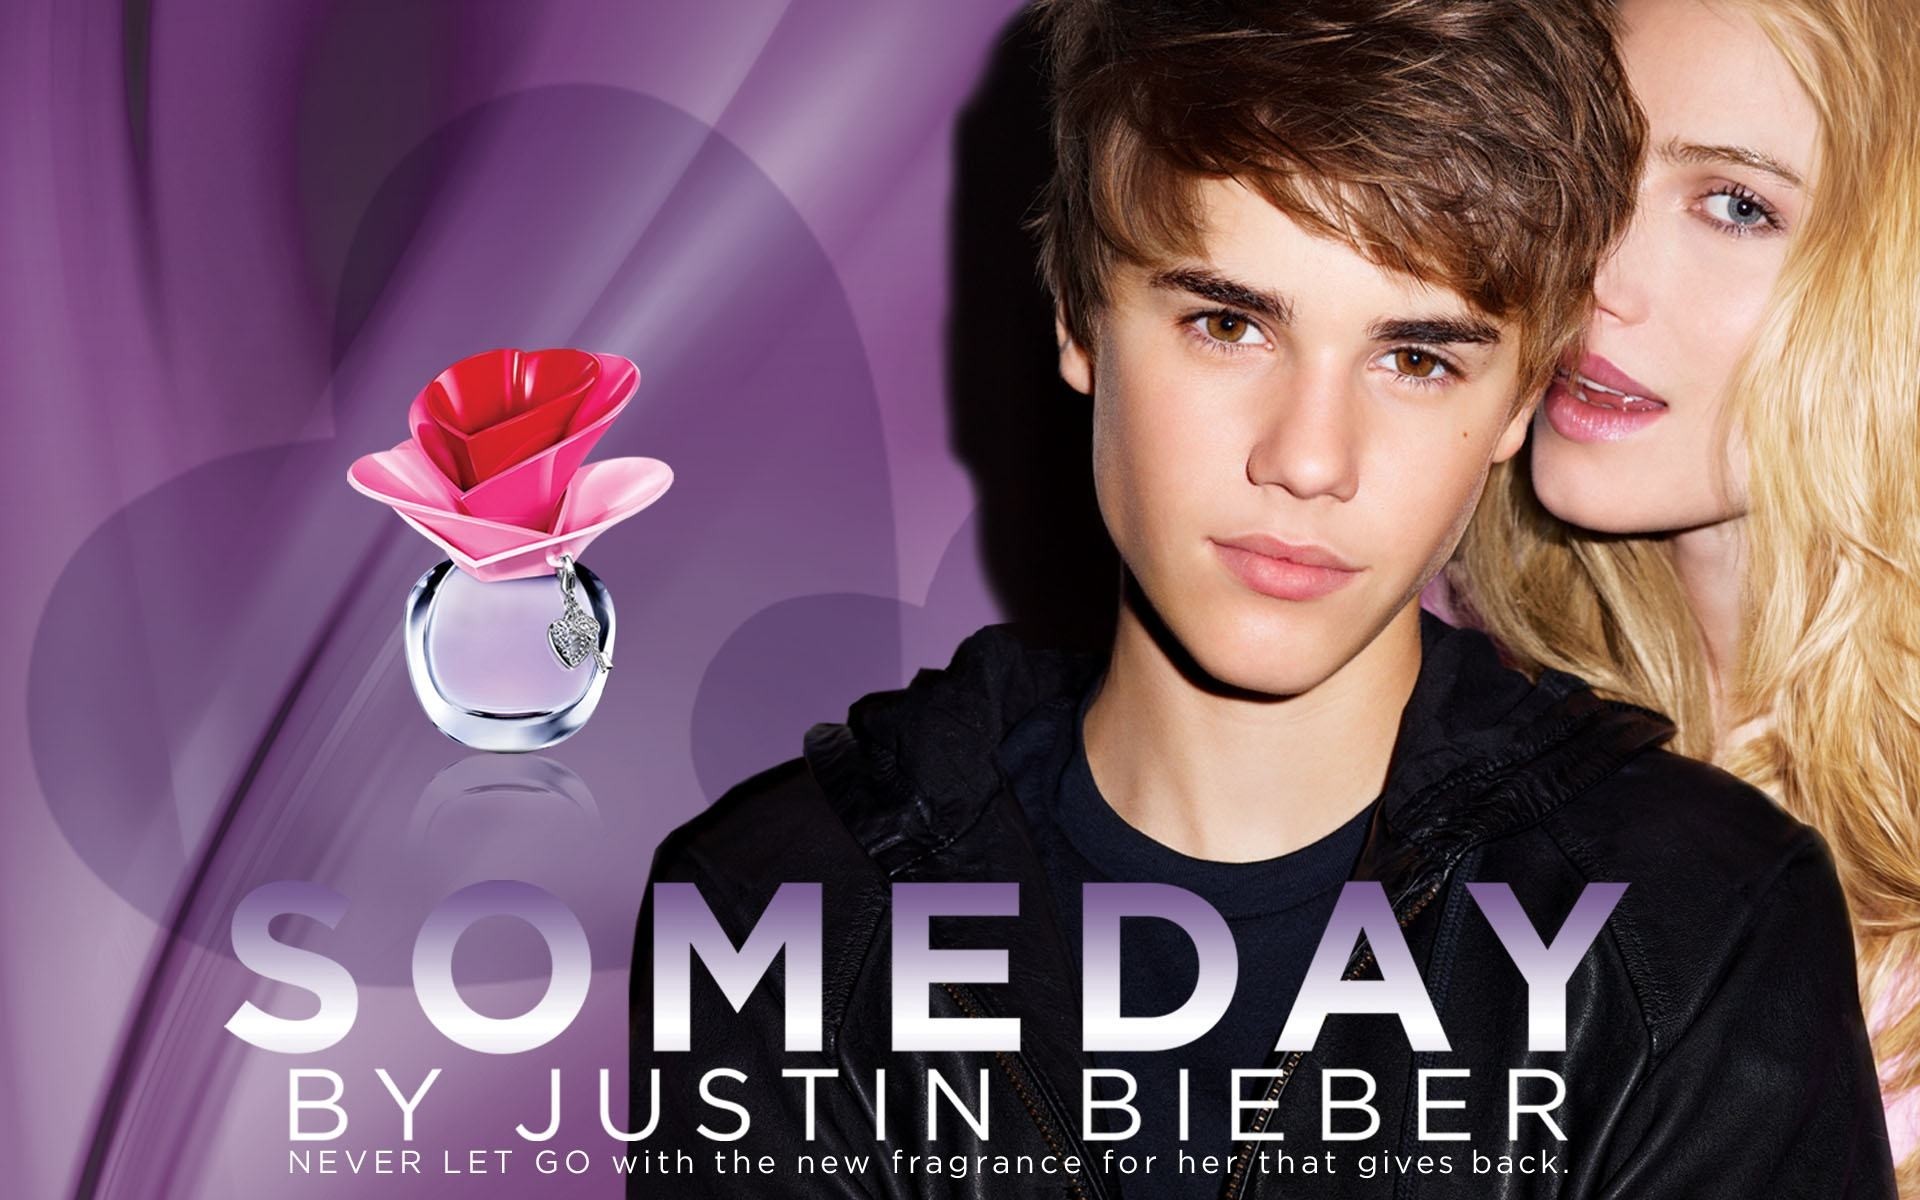 1920x1200 Wallpapers Backgrounds - Justin Bieber someday click set Background